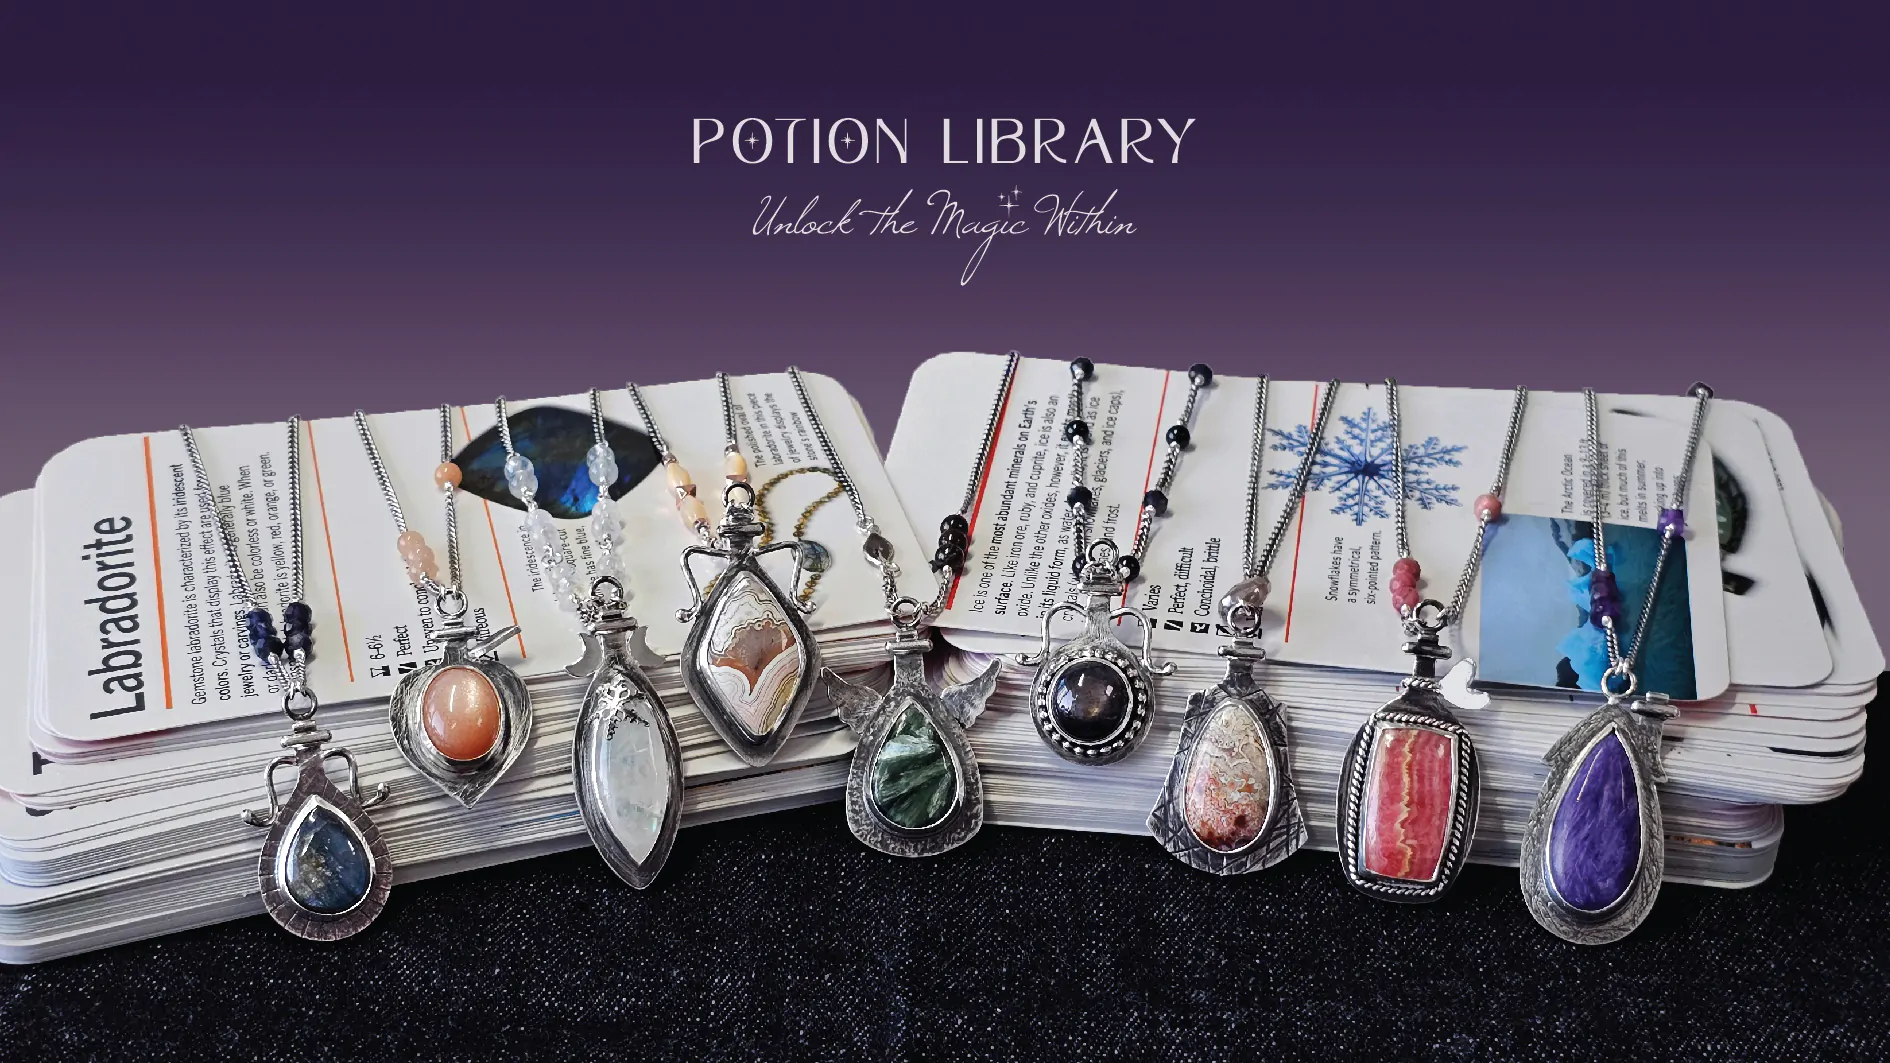 potion library - unlock the magic within - handmade sterling silver potion vial pendant necklaces